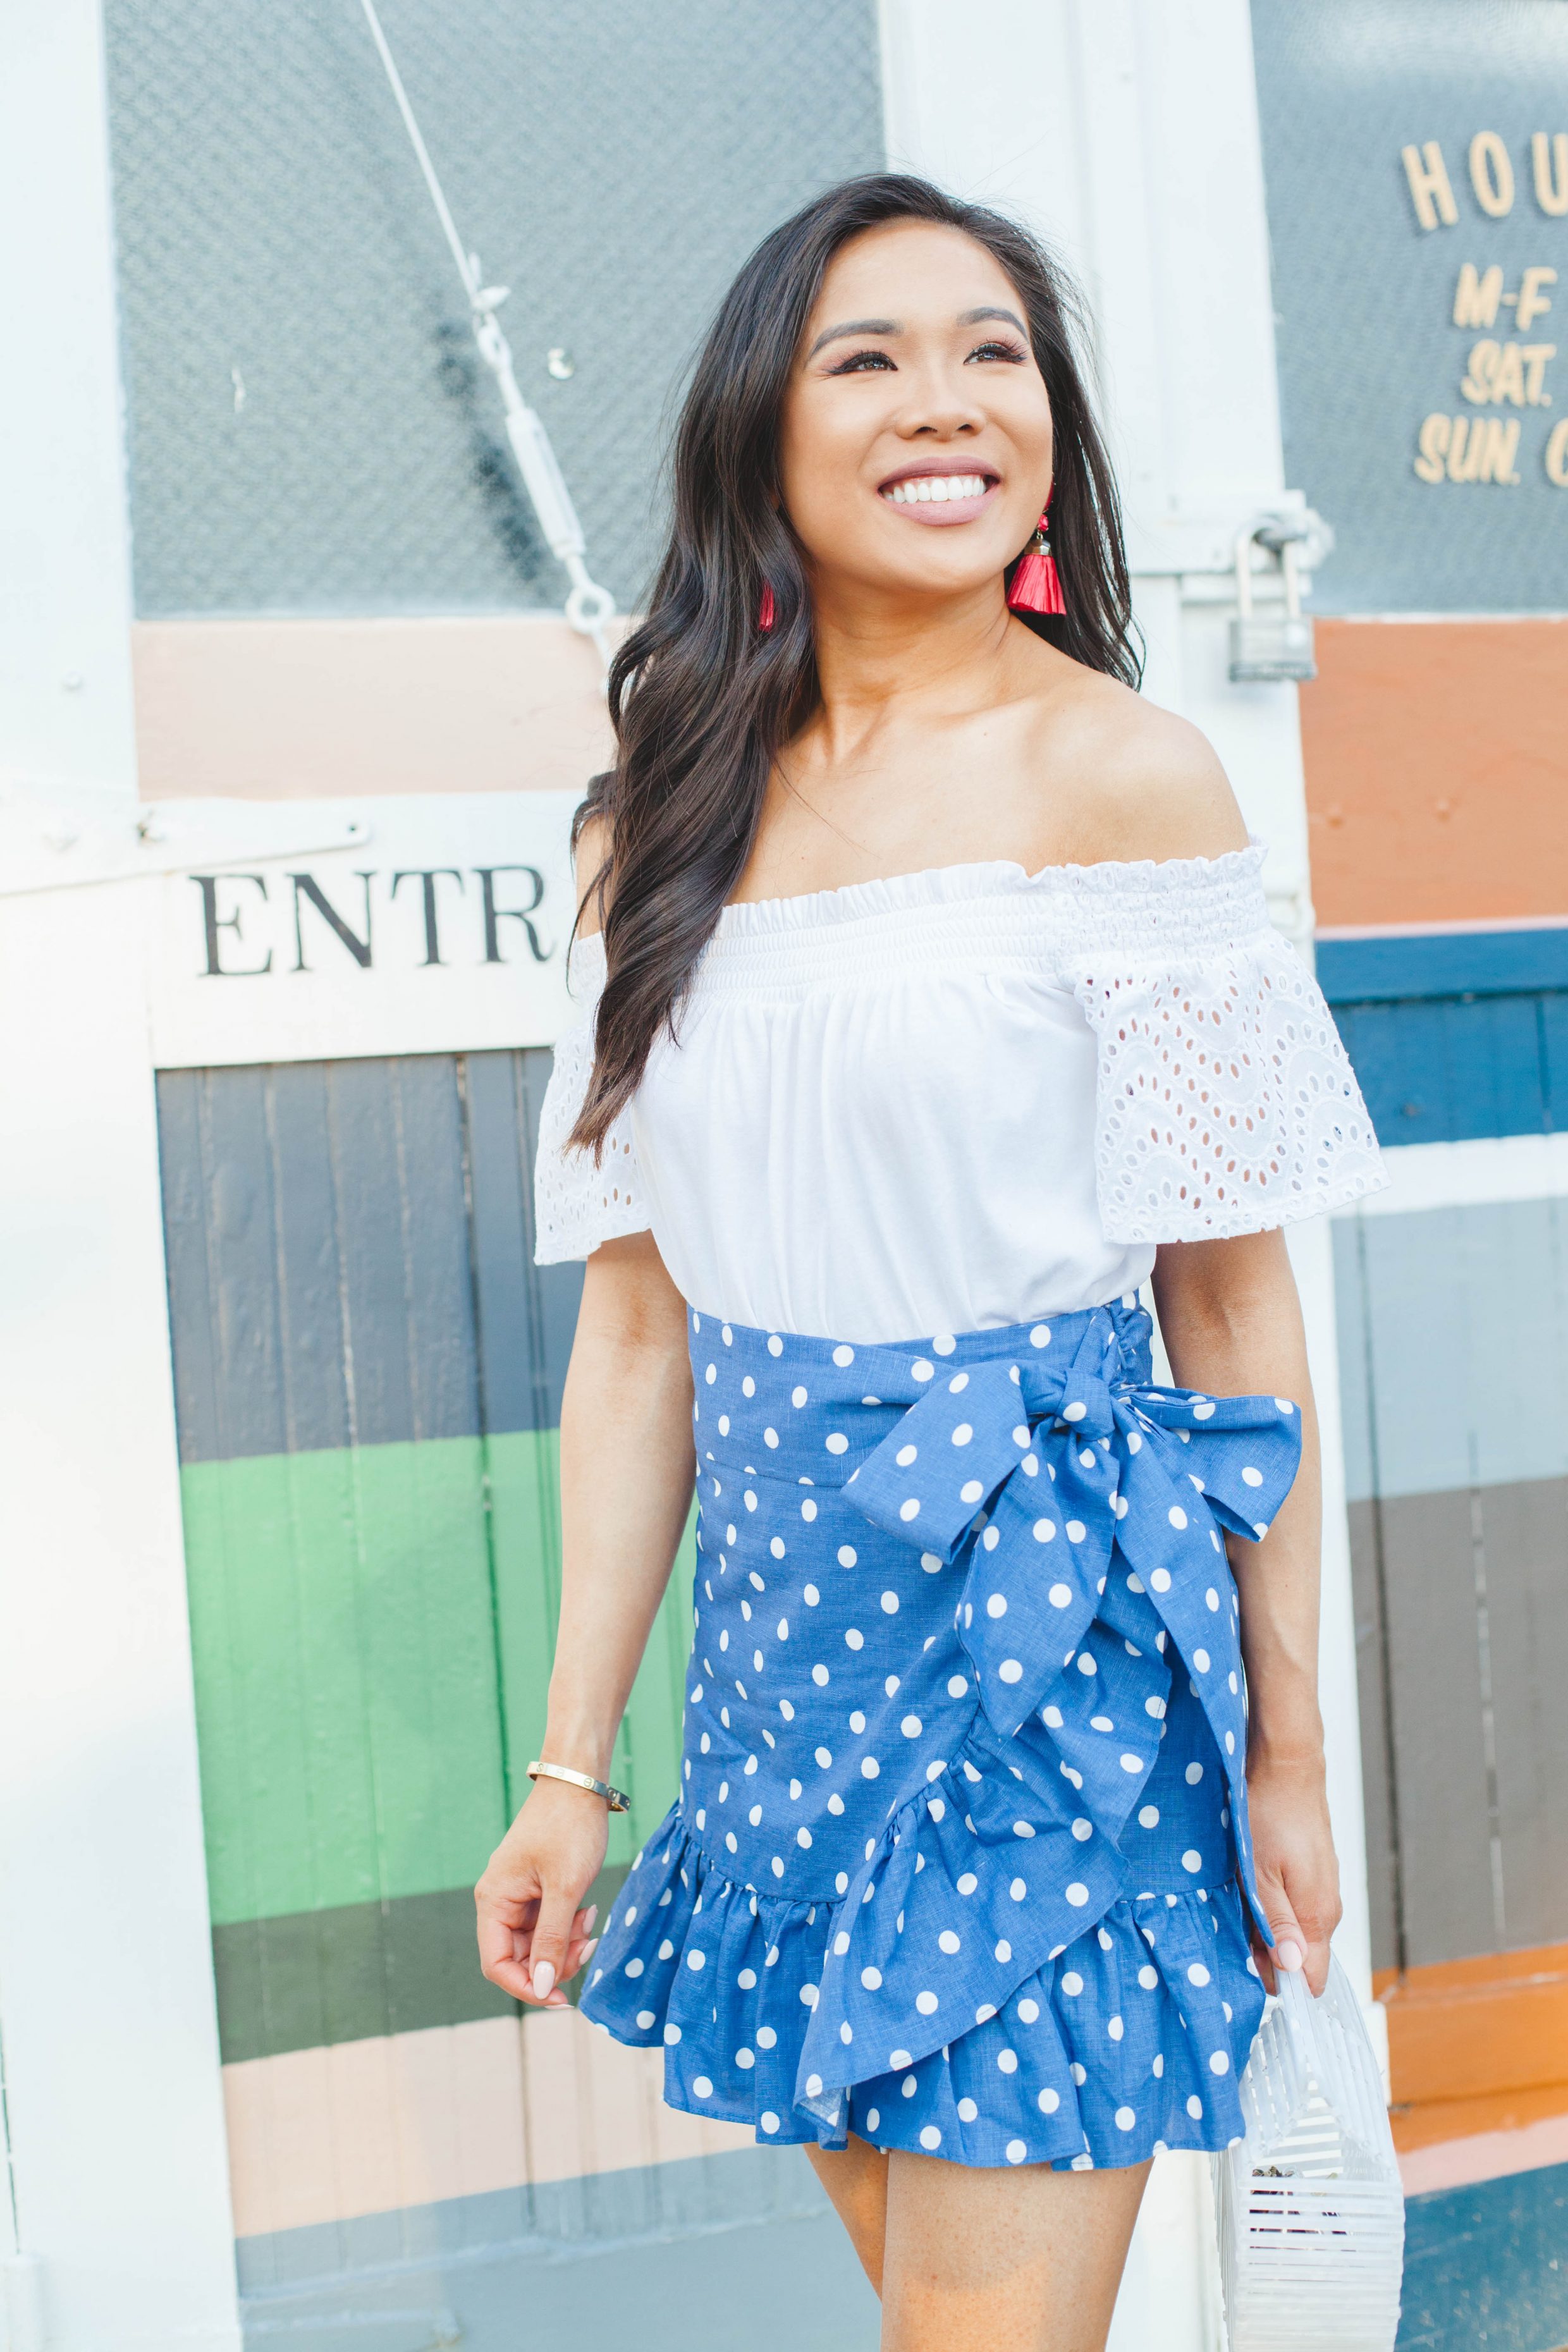 Fourth of July Outfit Idea :: Red, White & Blue - Color & Chic